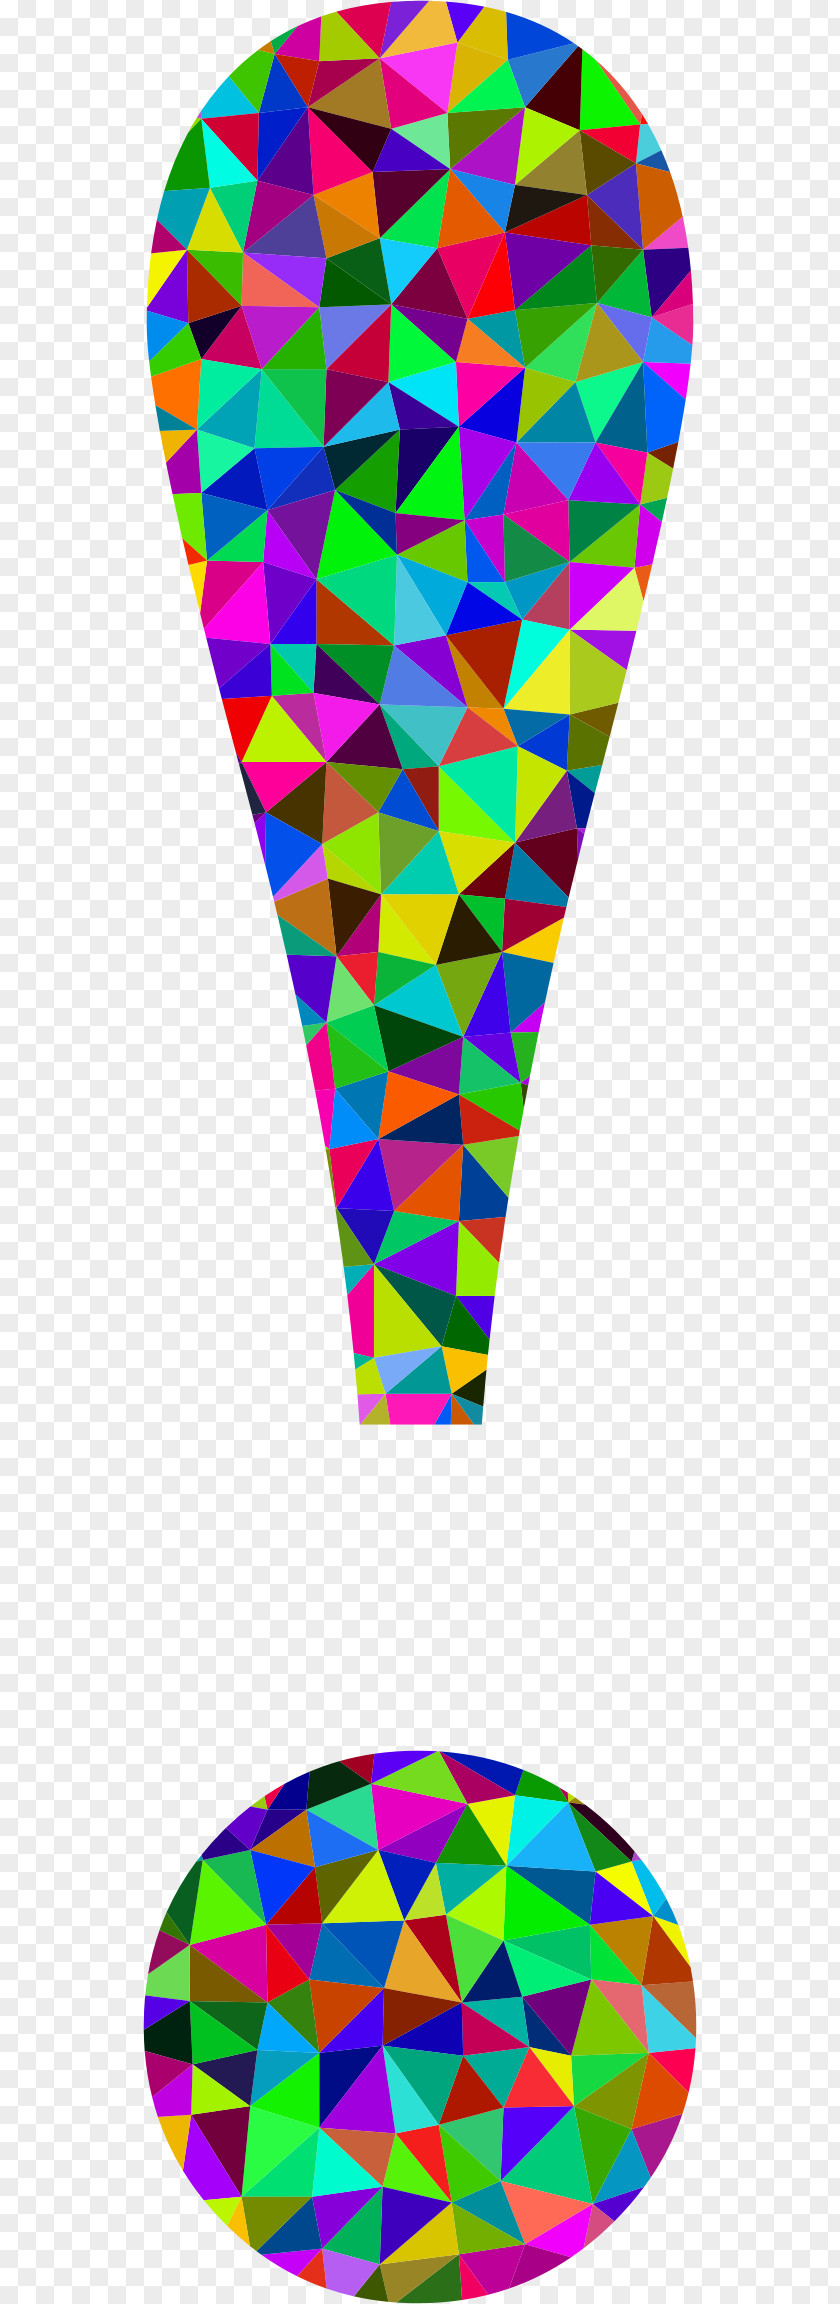 Triangle Exclamation Mark Interjection Clip Art PNG